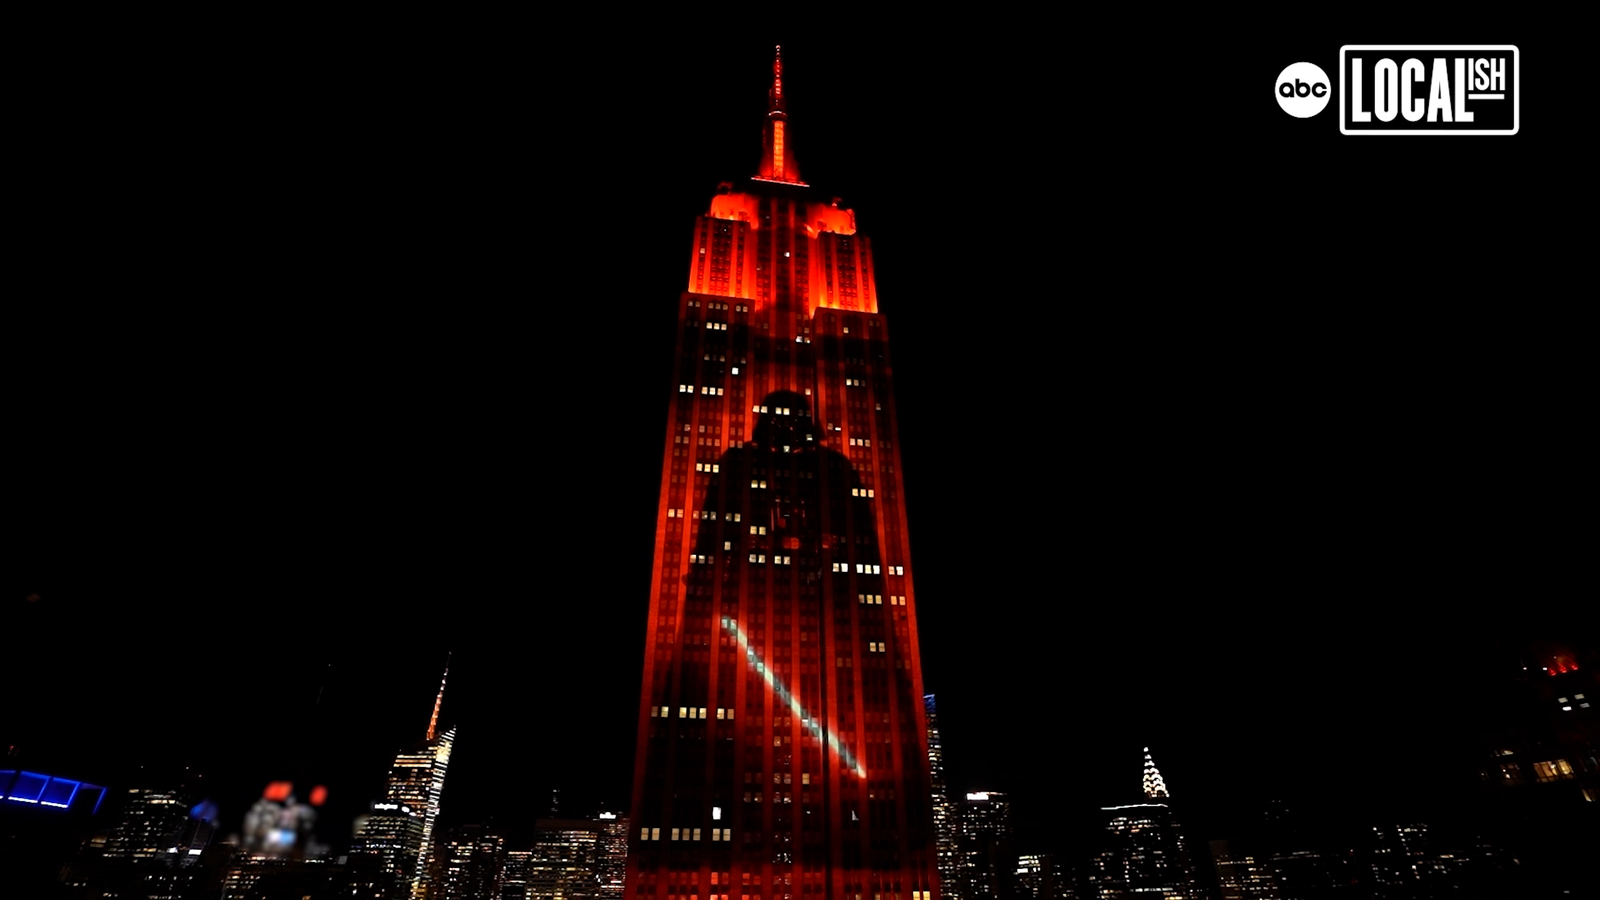 Star Wars takes over the Empire State Building [Video]